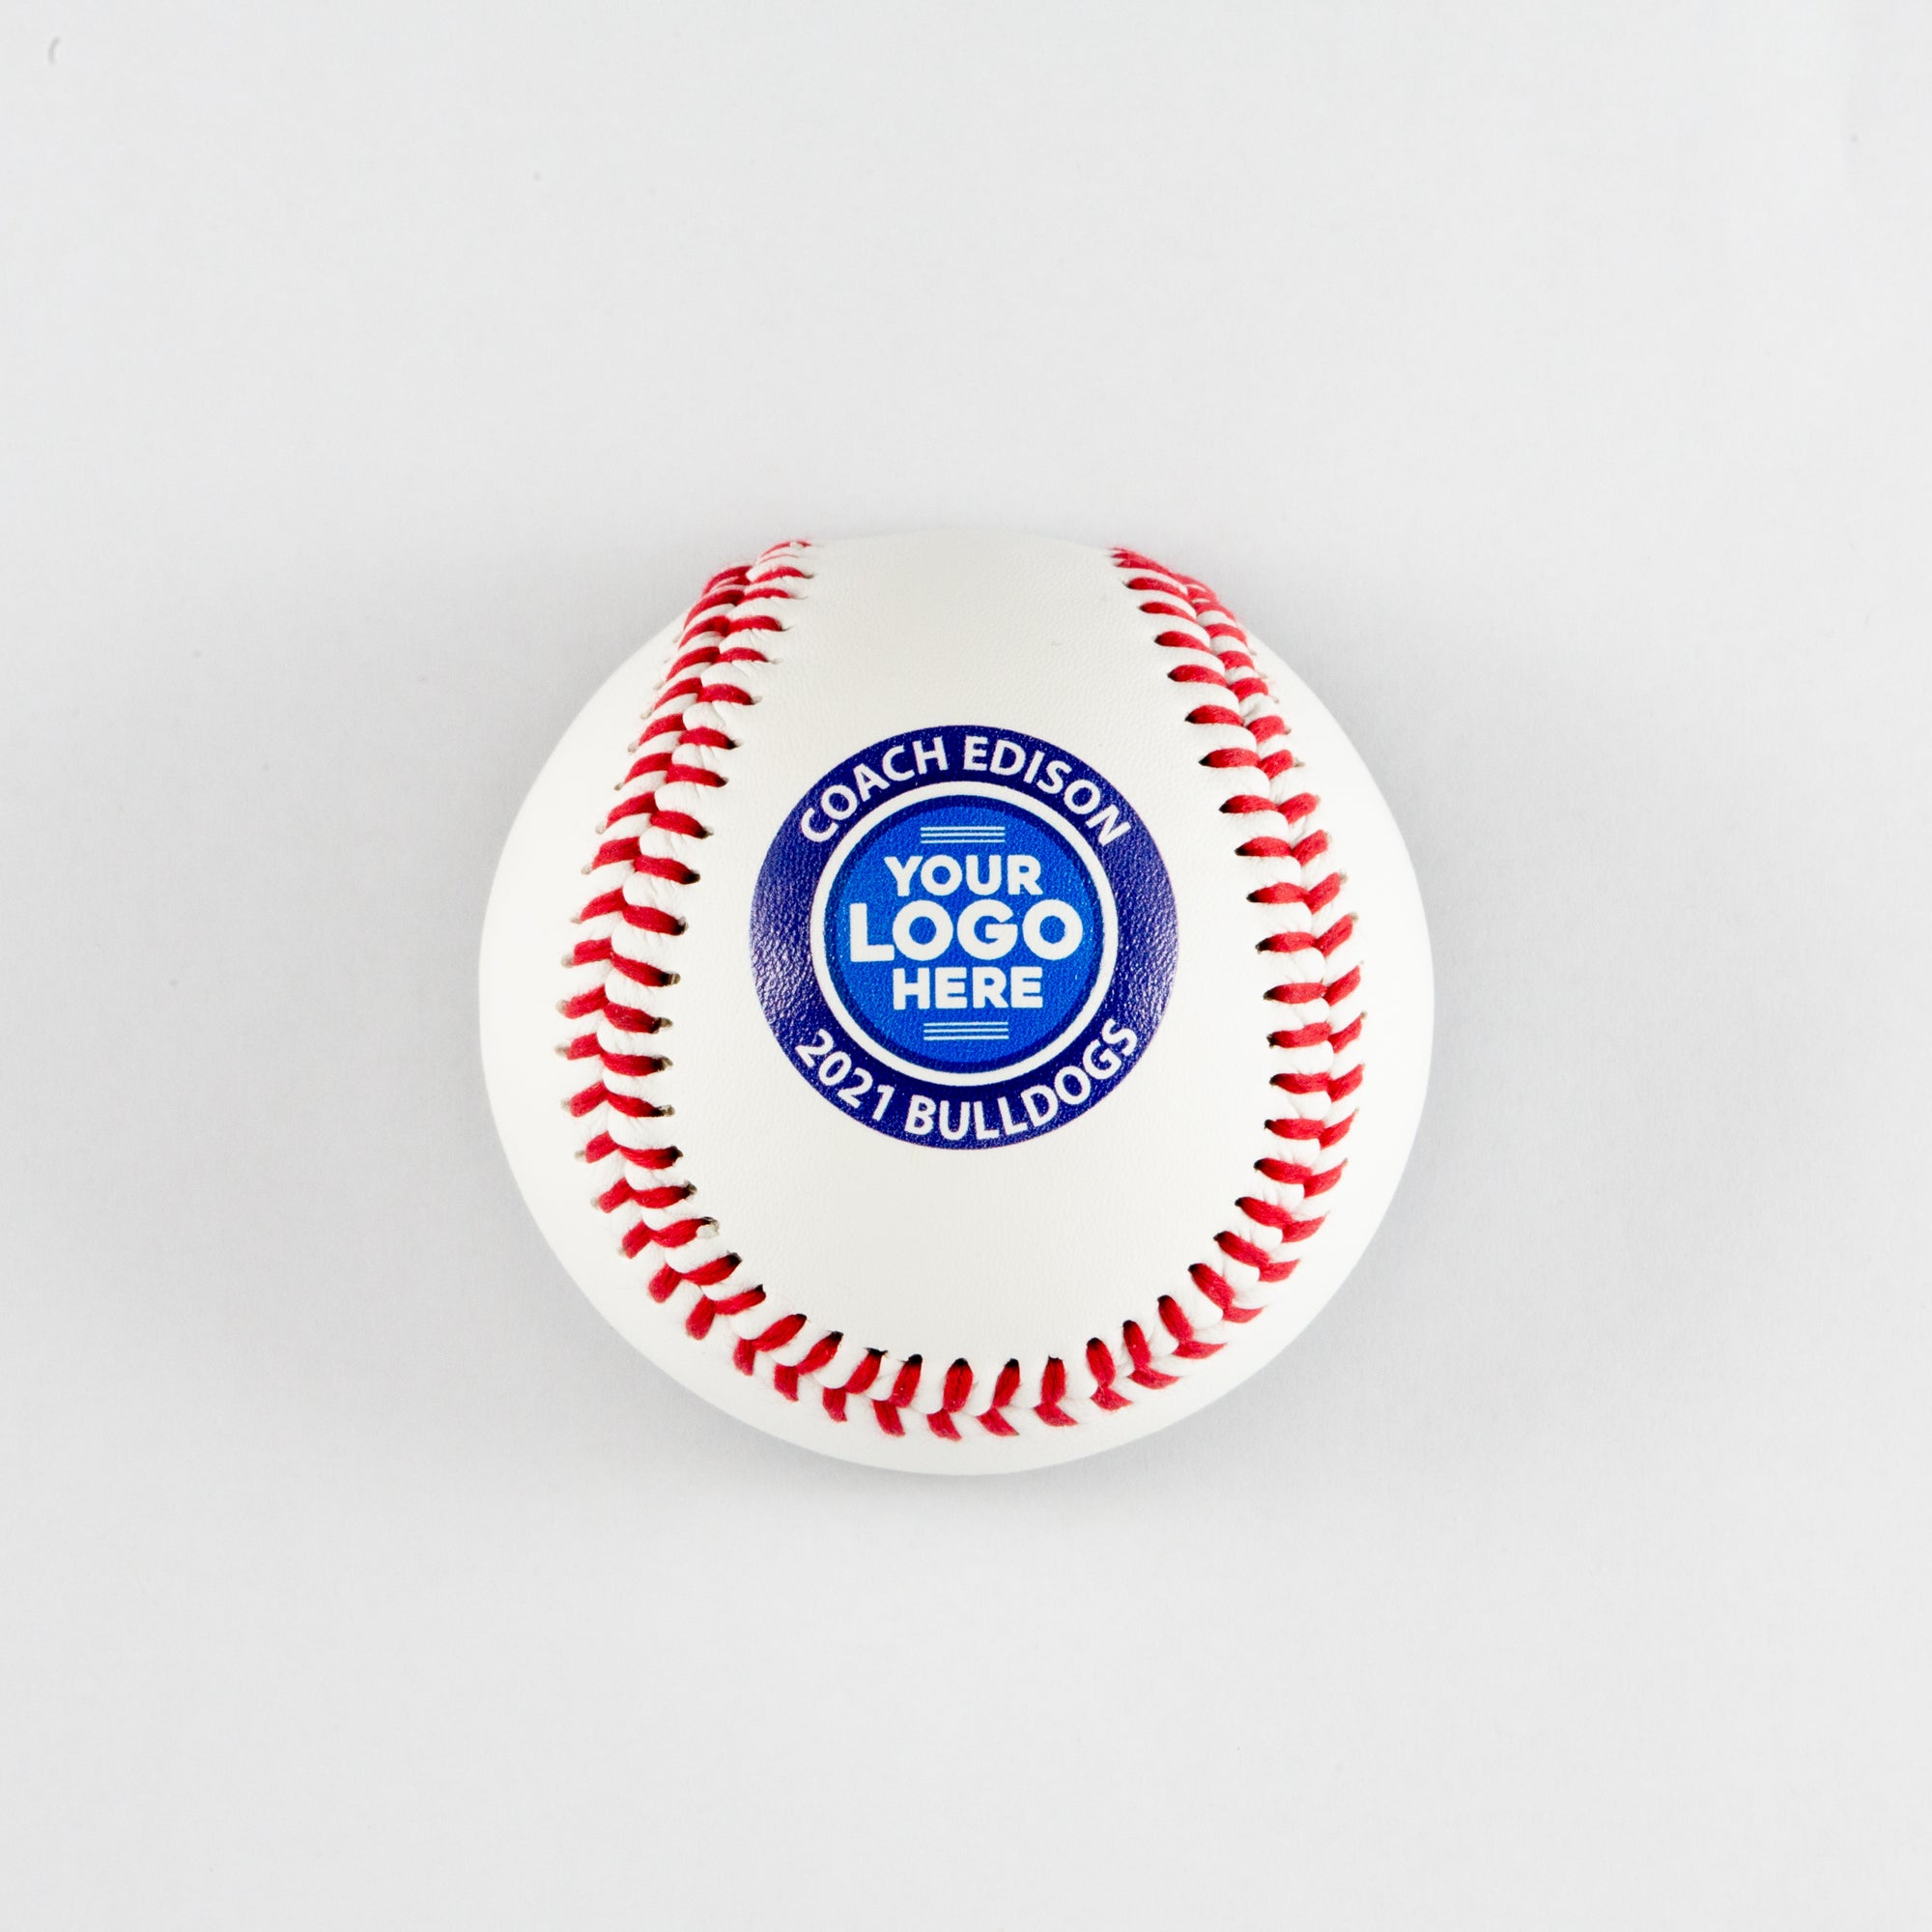 Printed Baseball with Text in Circle Surrounding Your Logo Here Design 